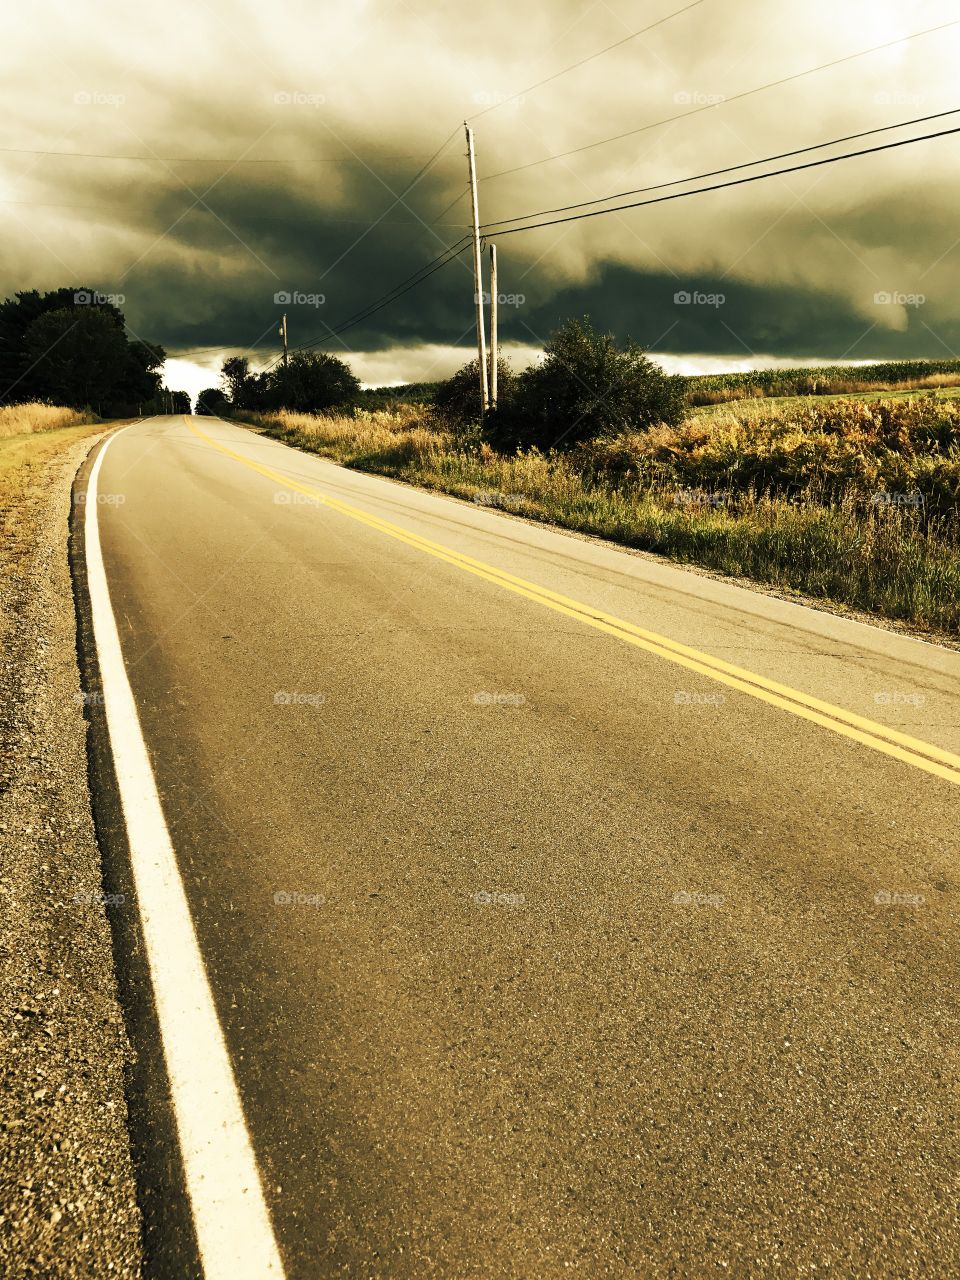 Storm Clouds and BackRoads 